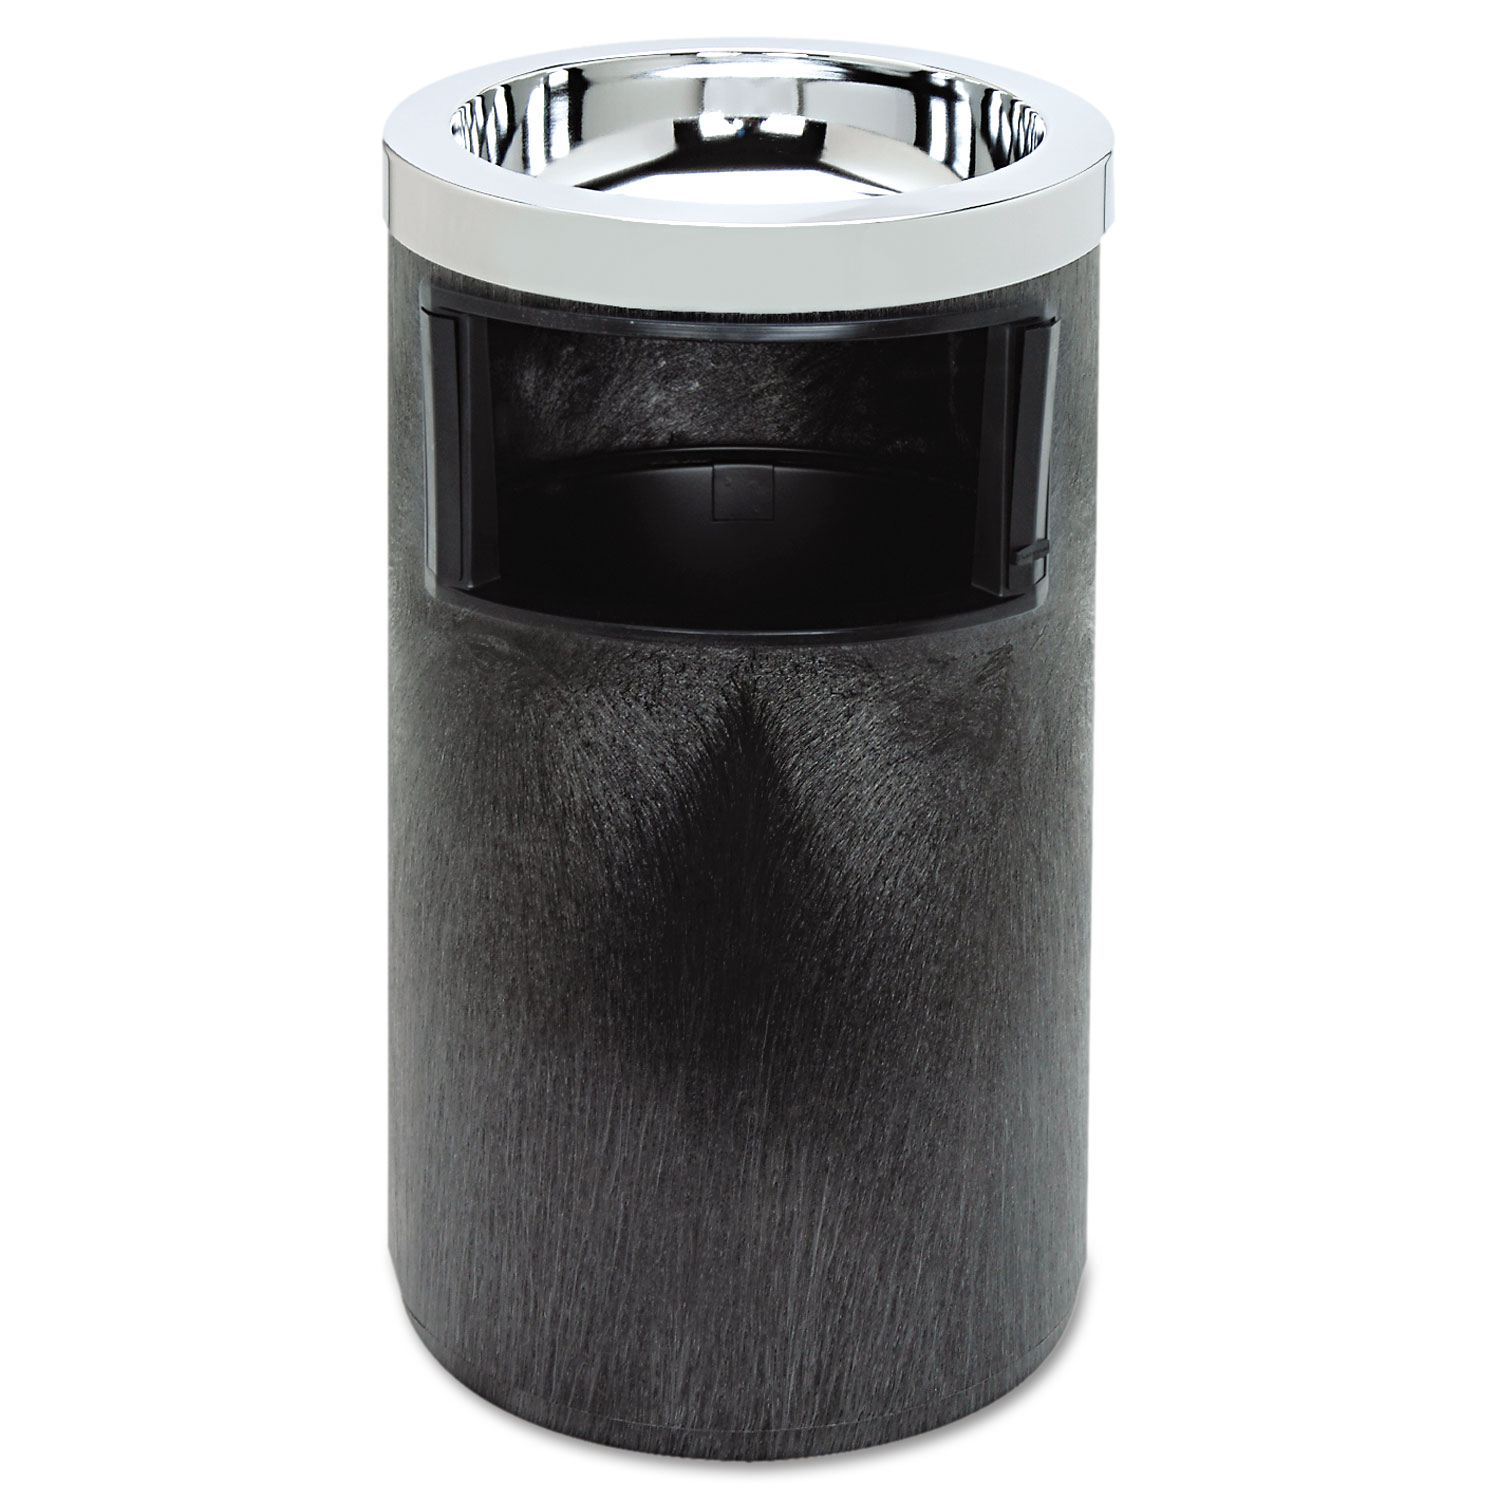  Rubbermaid Commercial FG258600BLA Smoking Urn with Ashtray and Metal Liner, 2 gal, 19.5h x 12.5 dia, Black (RCP258600BLA) 